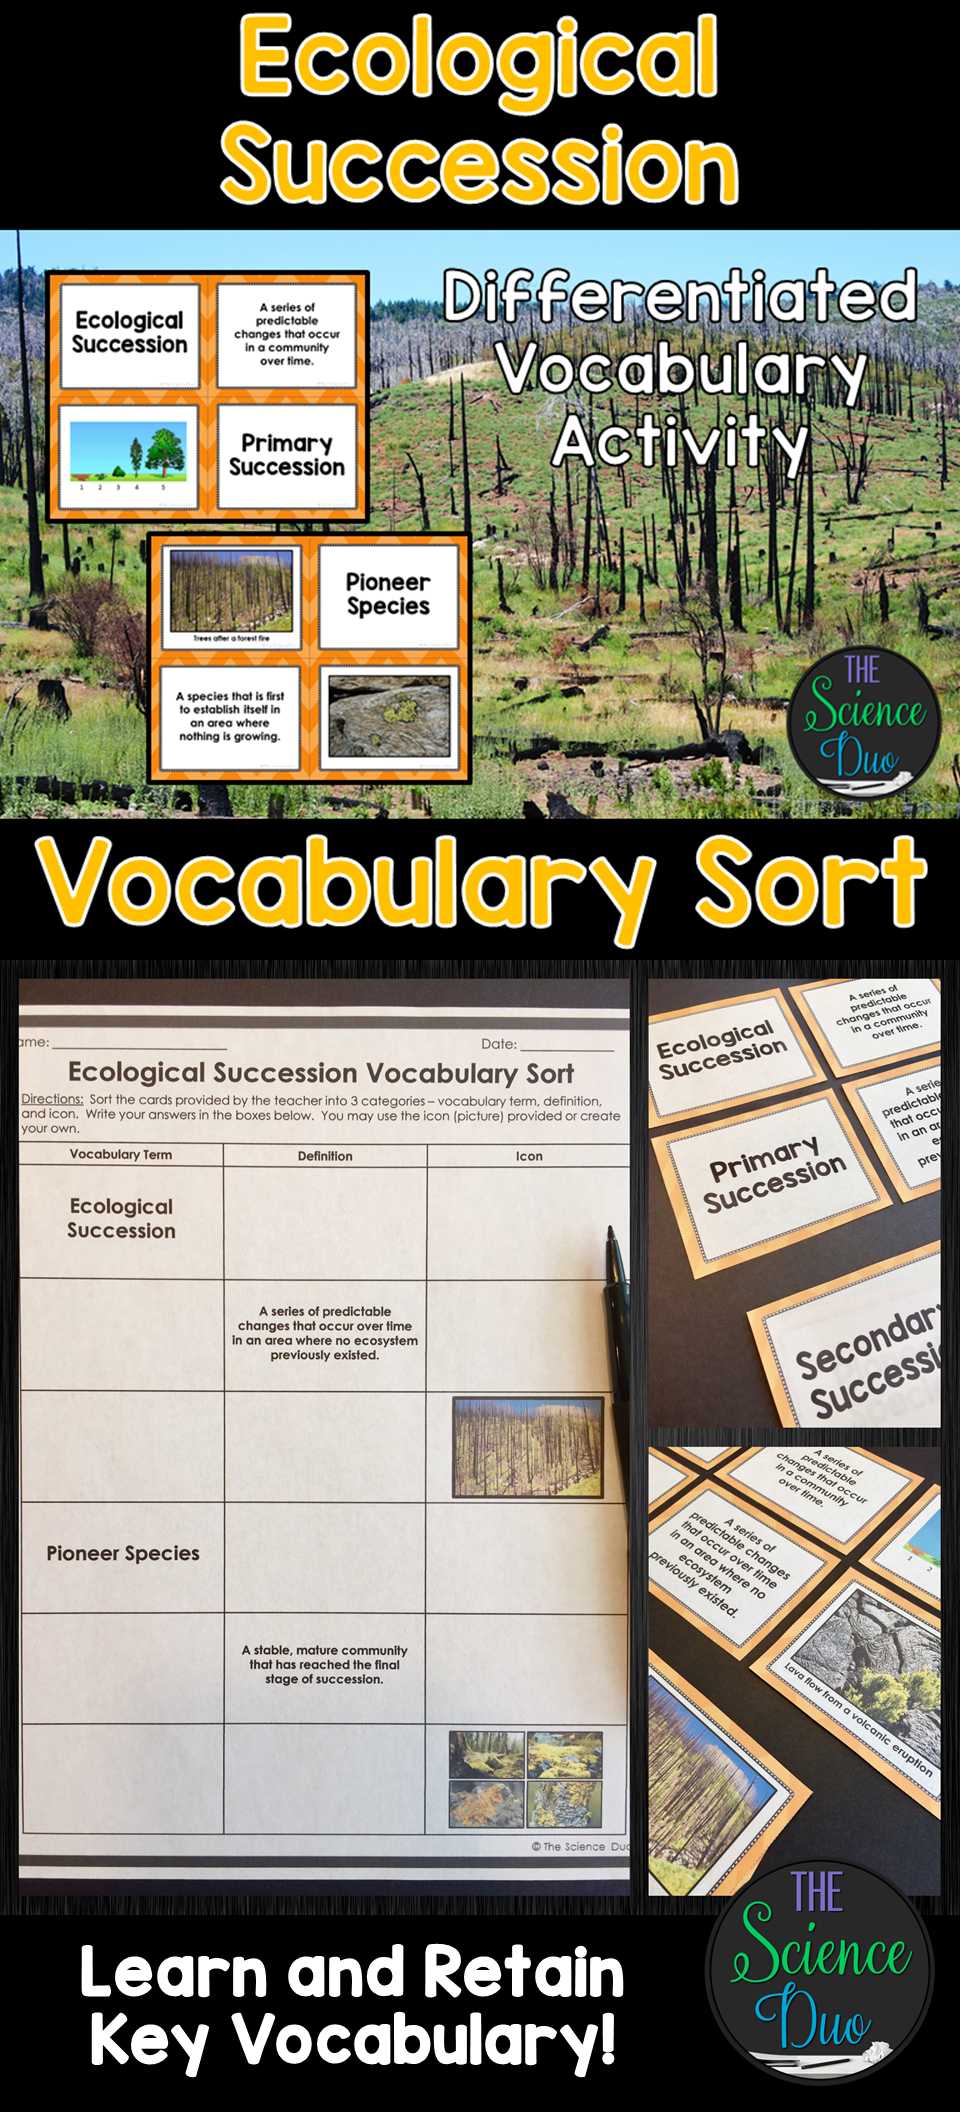 Principles Of Ecology Worksheet Answers Along with Help Your Students Grasp and Retain Key Ecological Succession